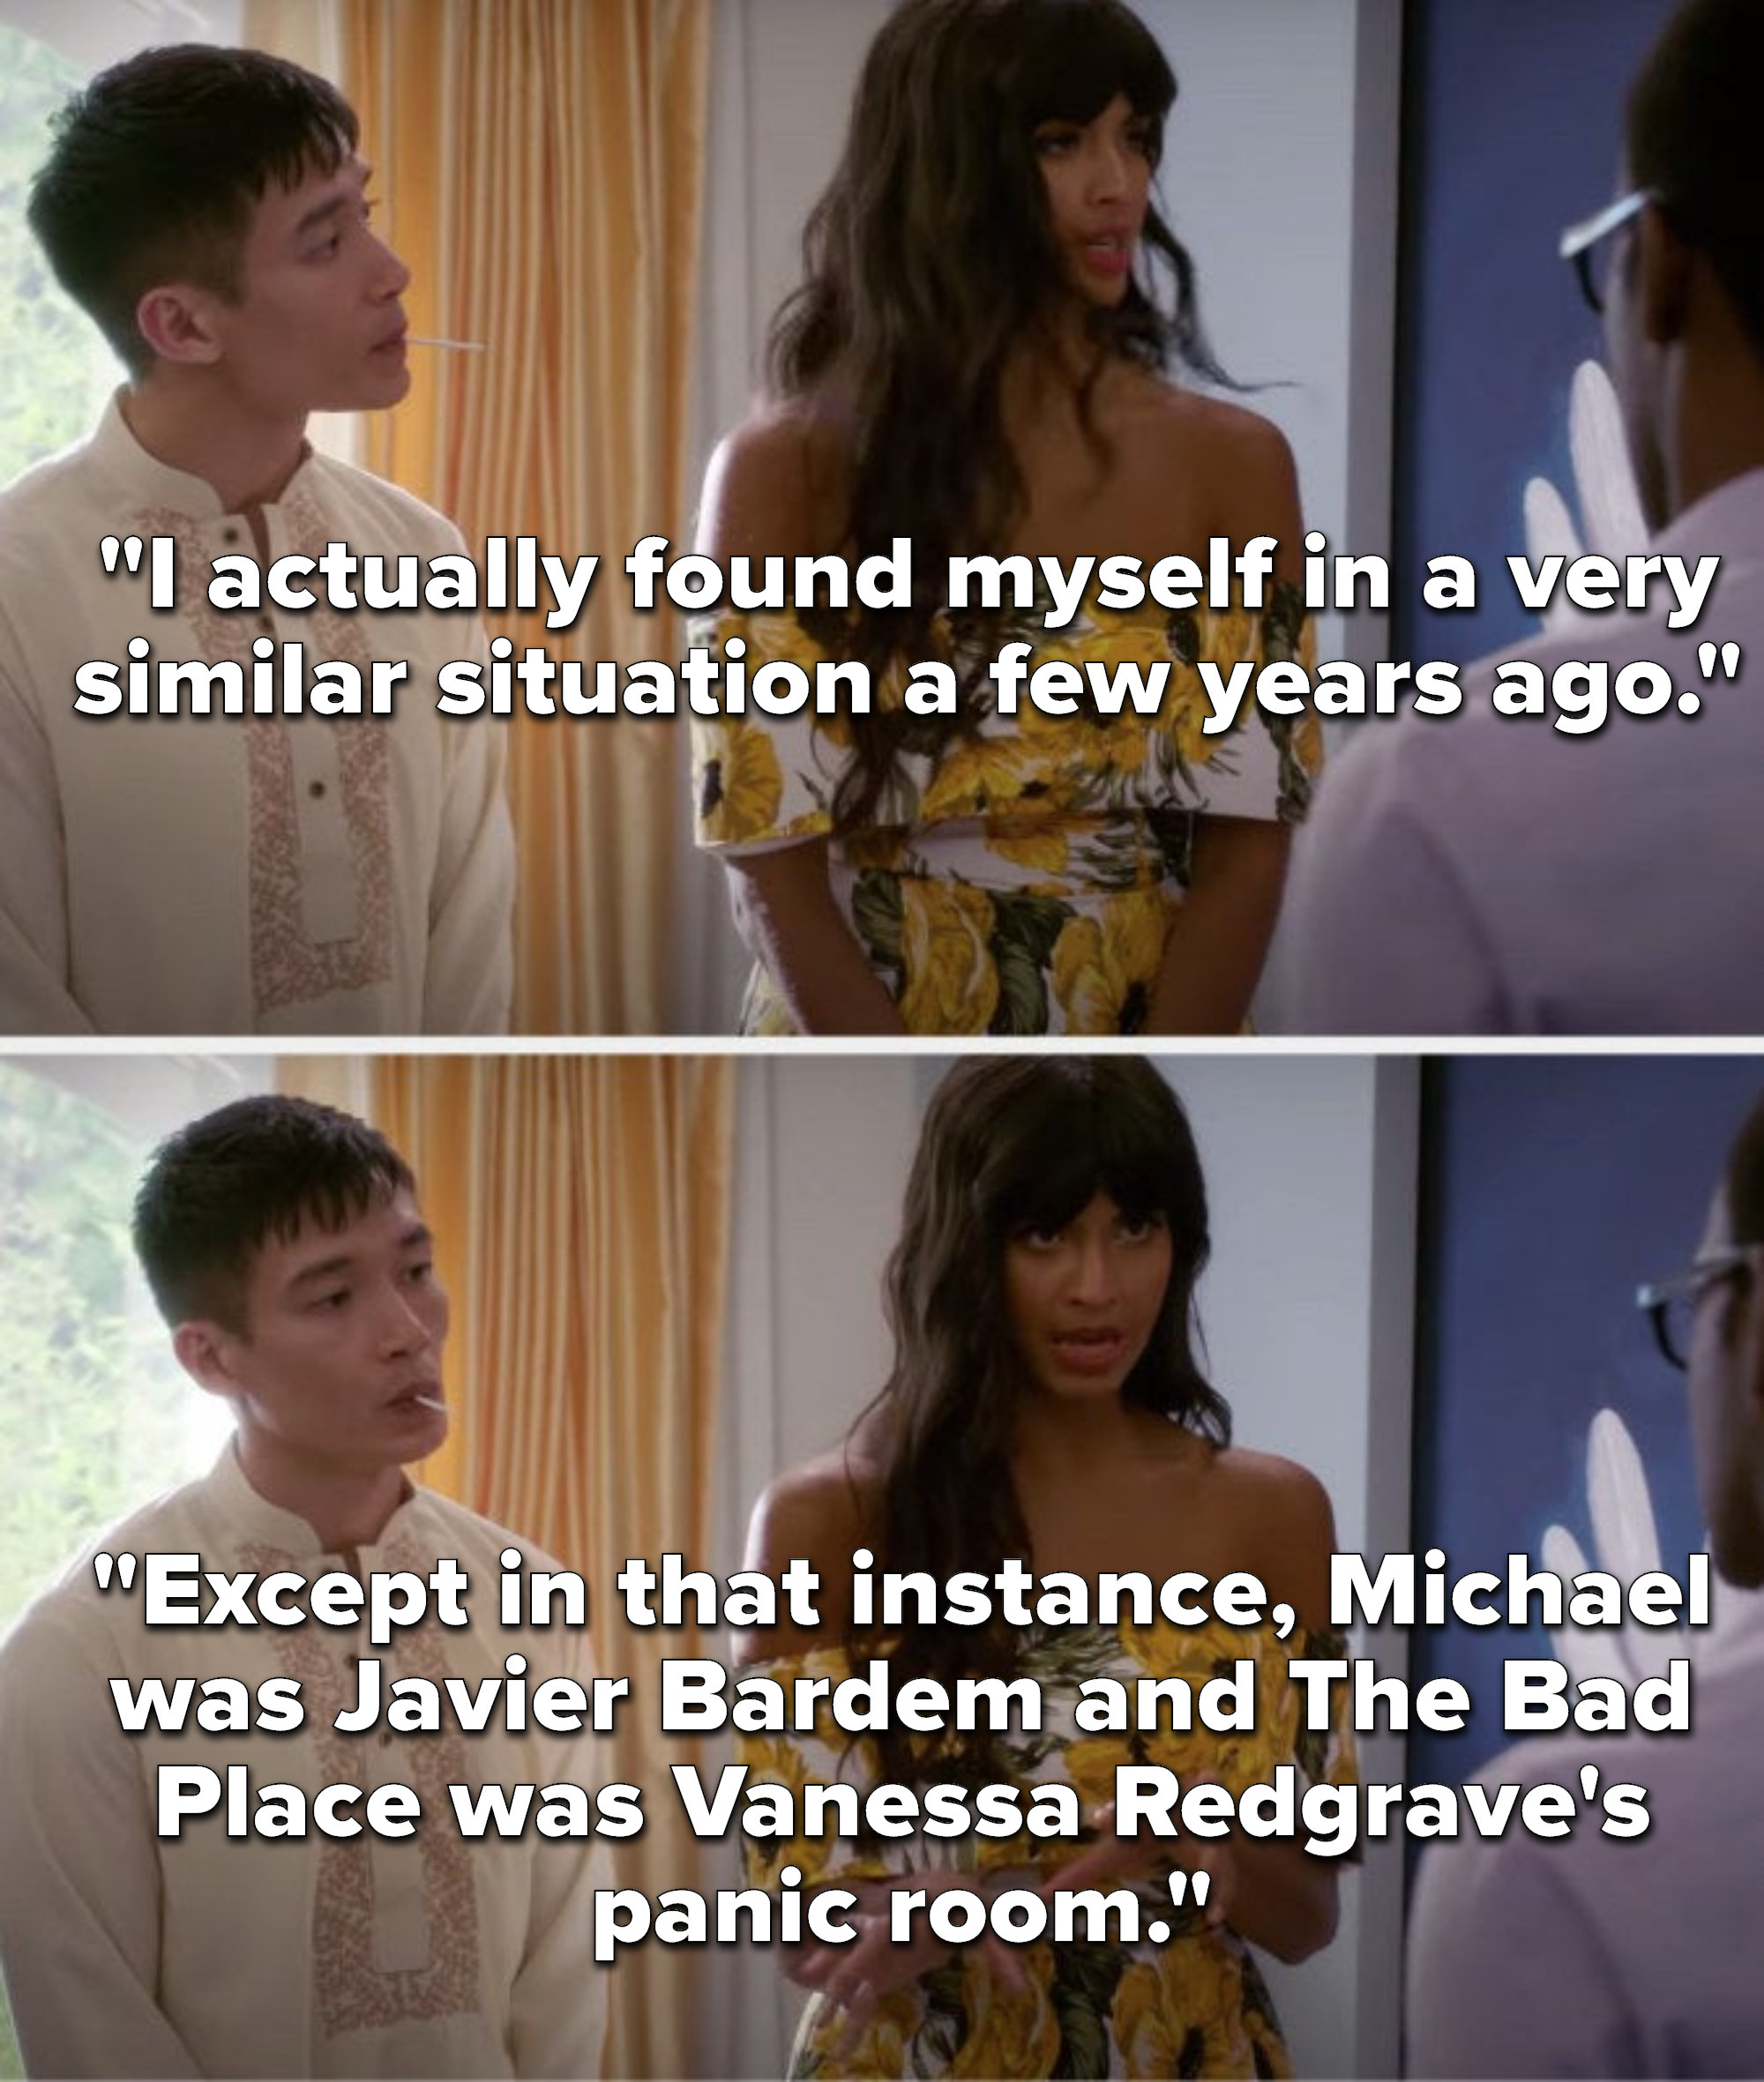 Tahani says, I actually found myself in a very similar situation a few years ago, except in that instance, Michael was Javier Bardem and The Bad Place was Vanessa Redgrave&#x27;s panic room